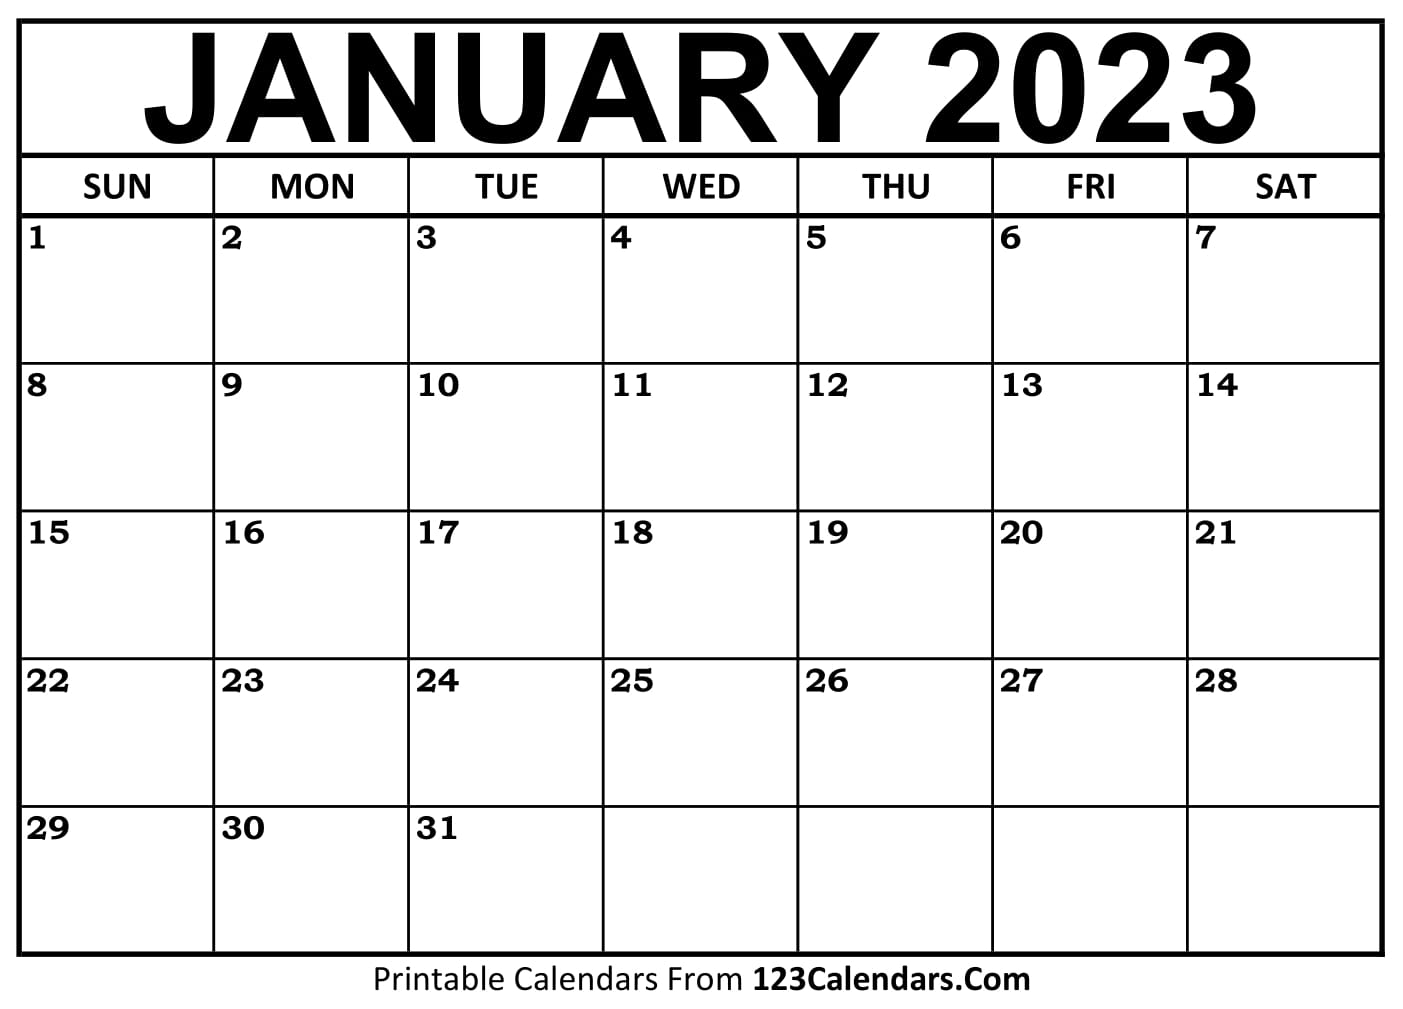 December 2022 To January 2023 Calendar Diary 2023 1St January 2023-31St December 2023 Stationery & Office Supplies  Address Books Umoonproductions.com